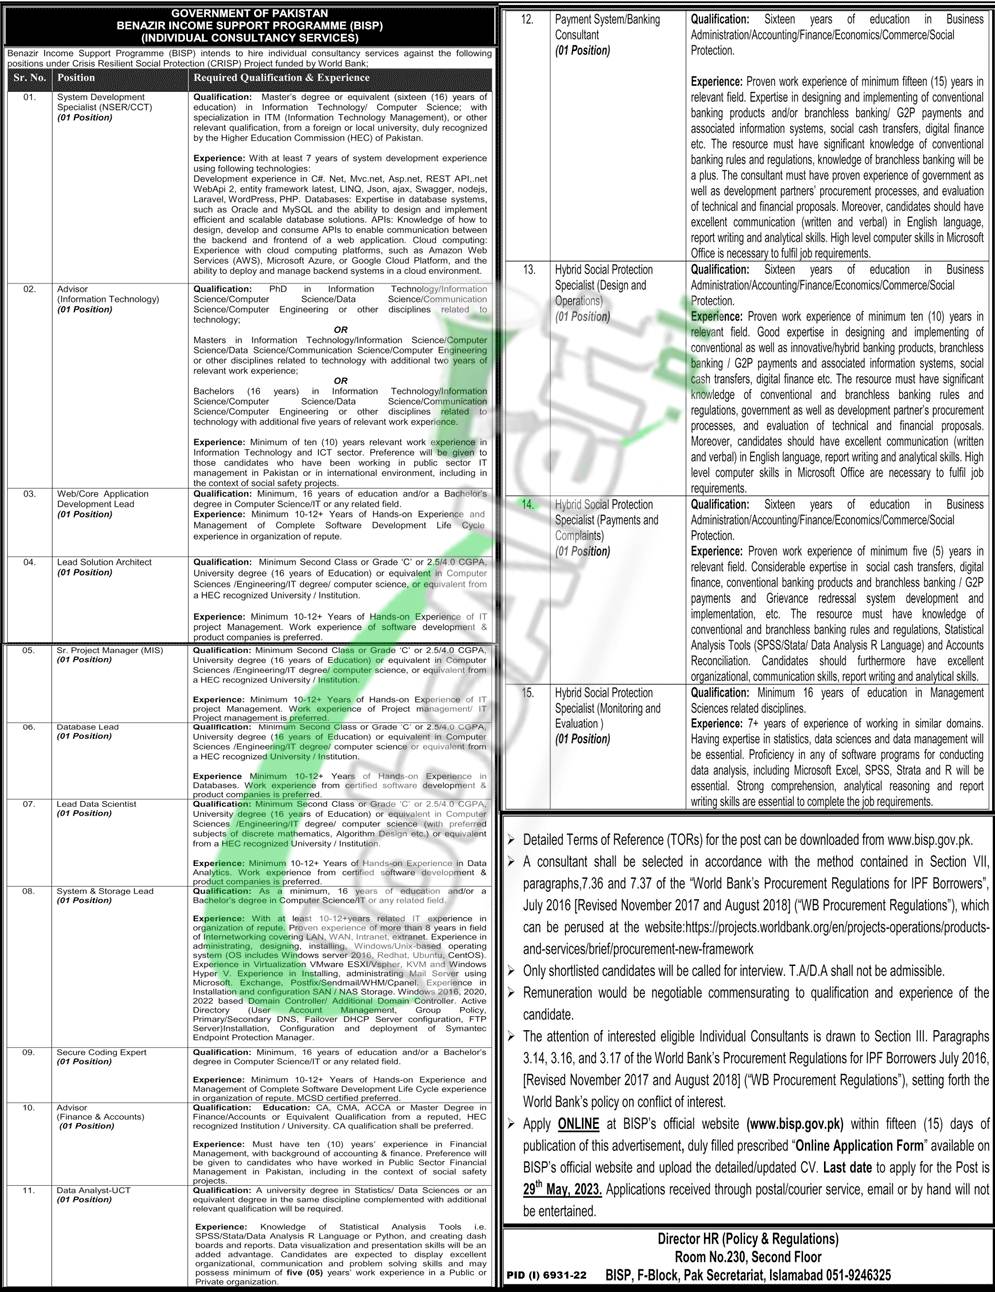 Benazir Income Support Programme Jobs